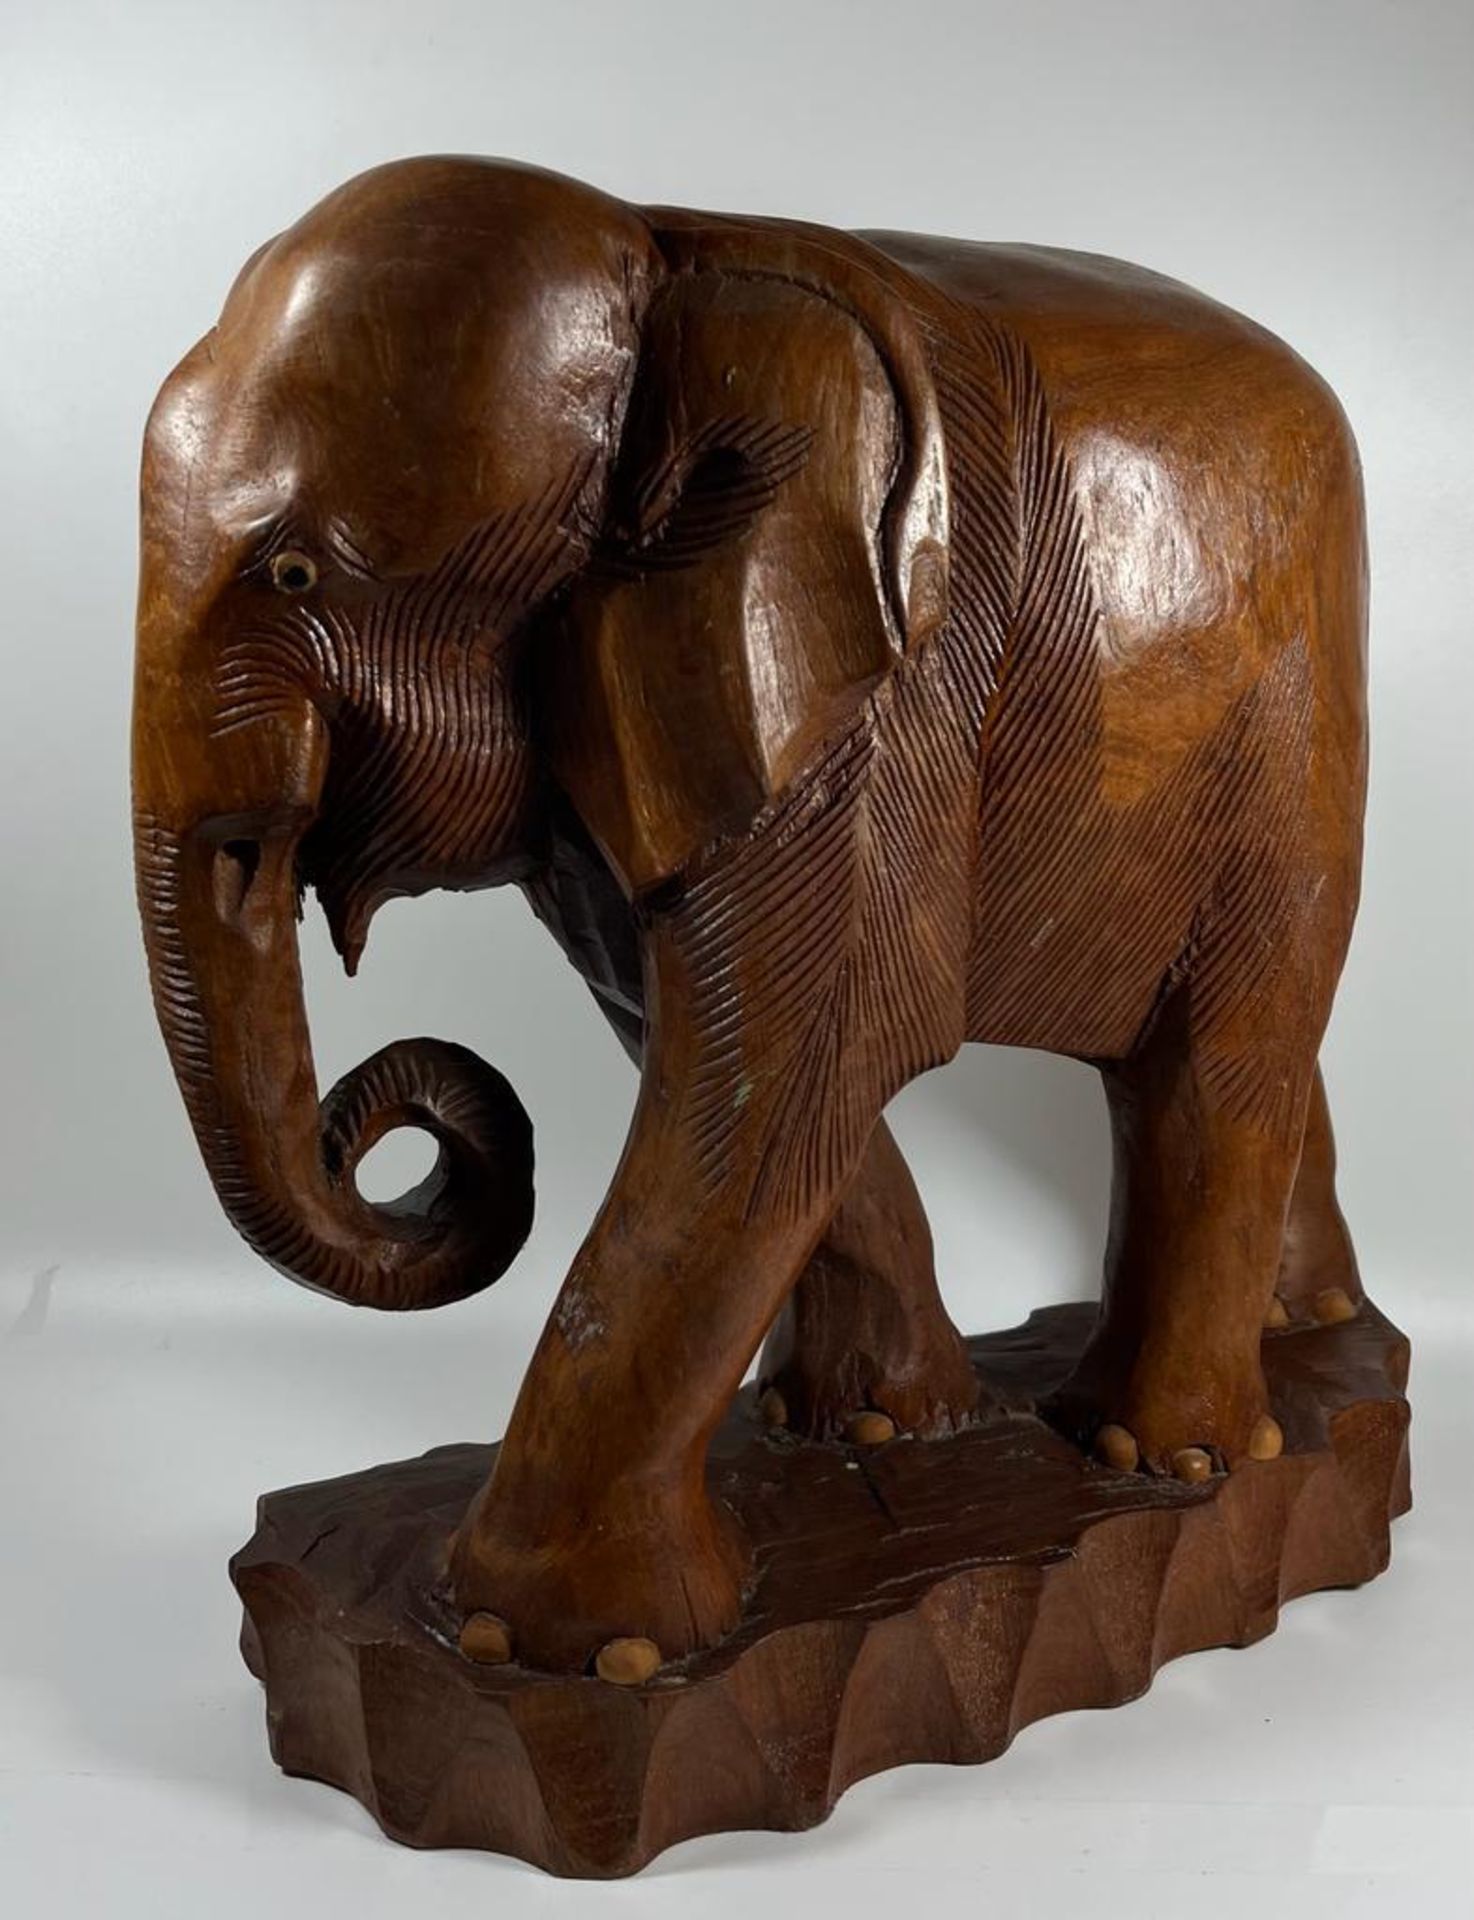 A LARGE AND HEAVY VINTAGE CARVED SOLID TEAK ELEPHANT MODEL, LIKELY CARVED FROM ONE PIECE OF TEAK - Image 3 of 10